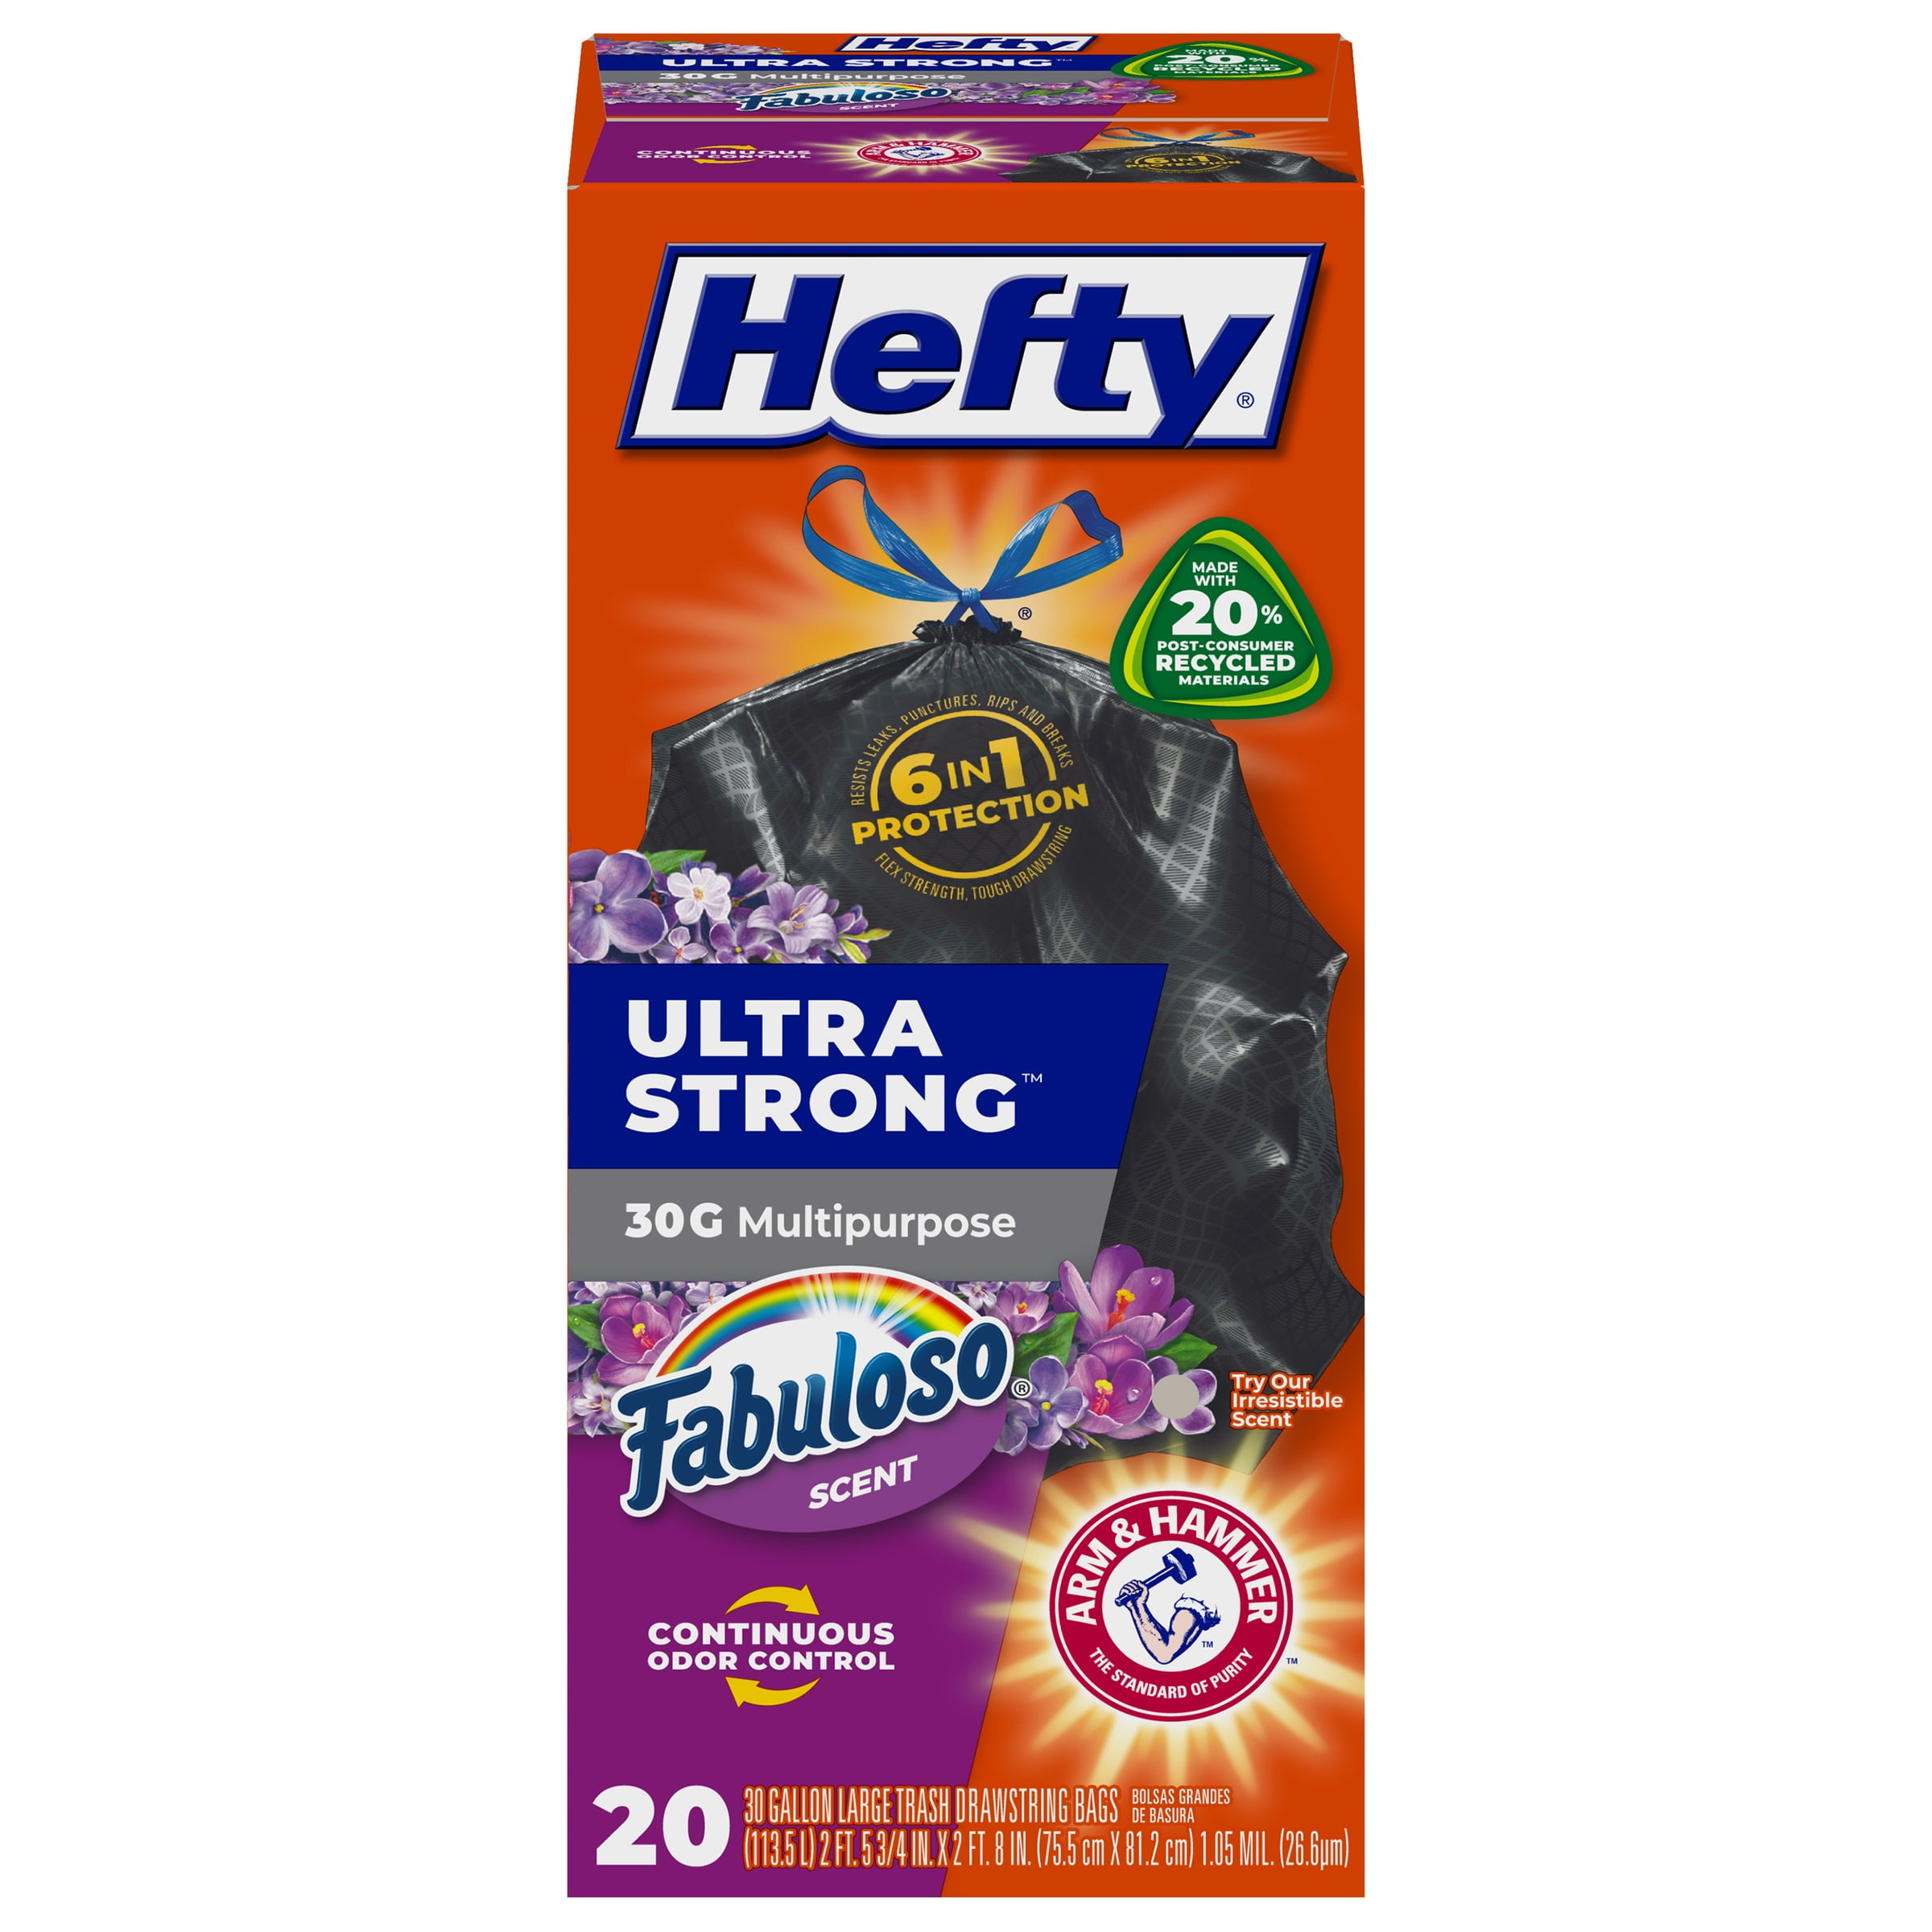 Hefty Ultra Strong Multipurpose Large Trash Bags, Black, Fabuloso Scent, 30  Gallon, 50 Count